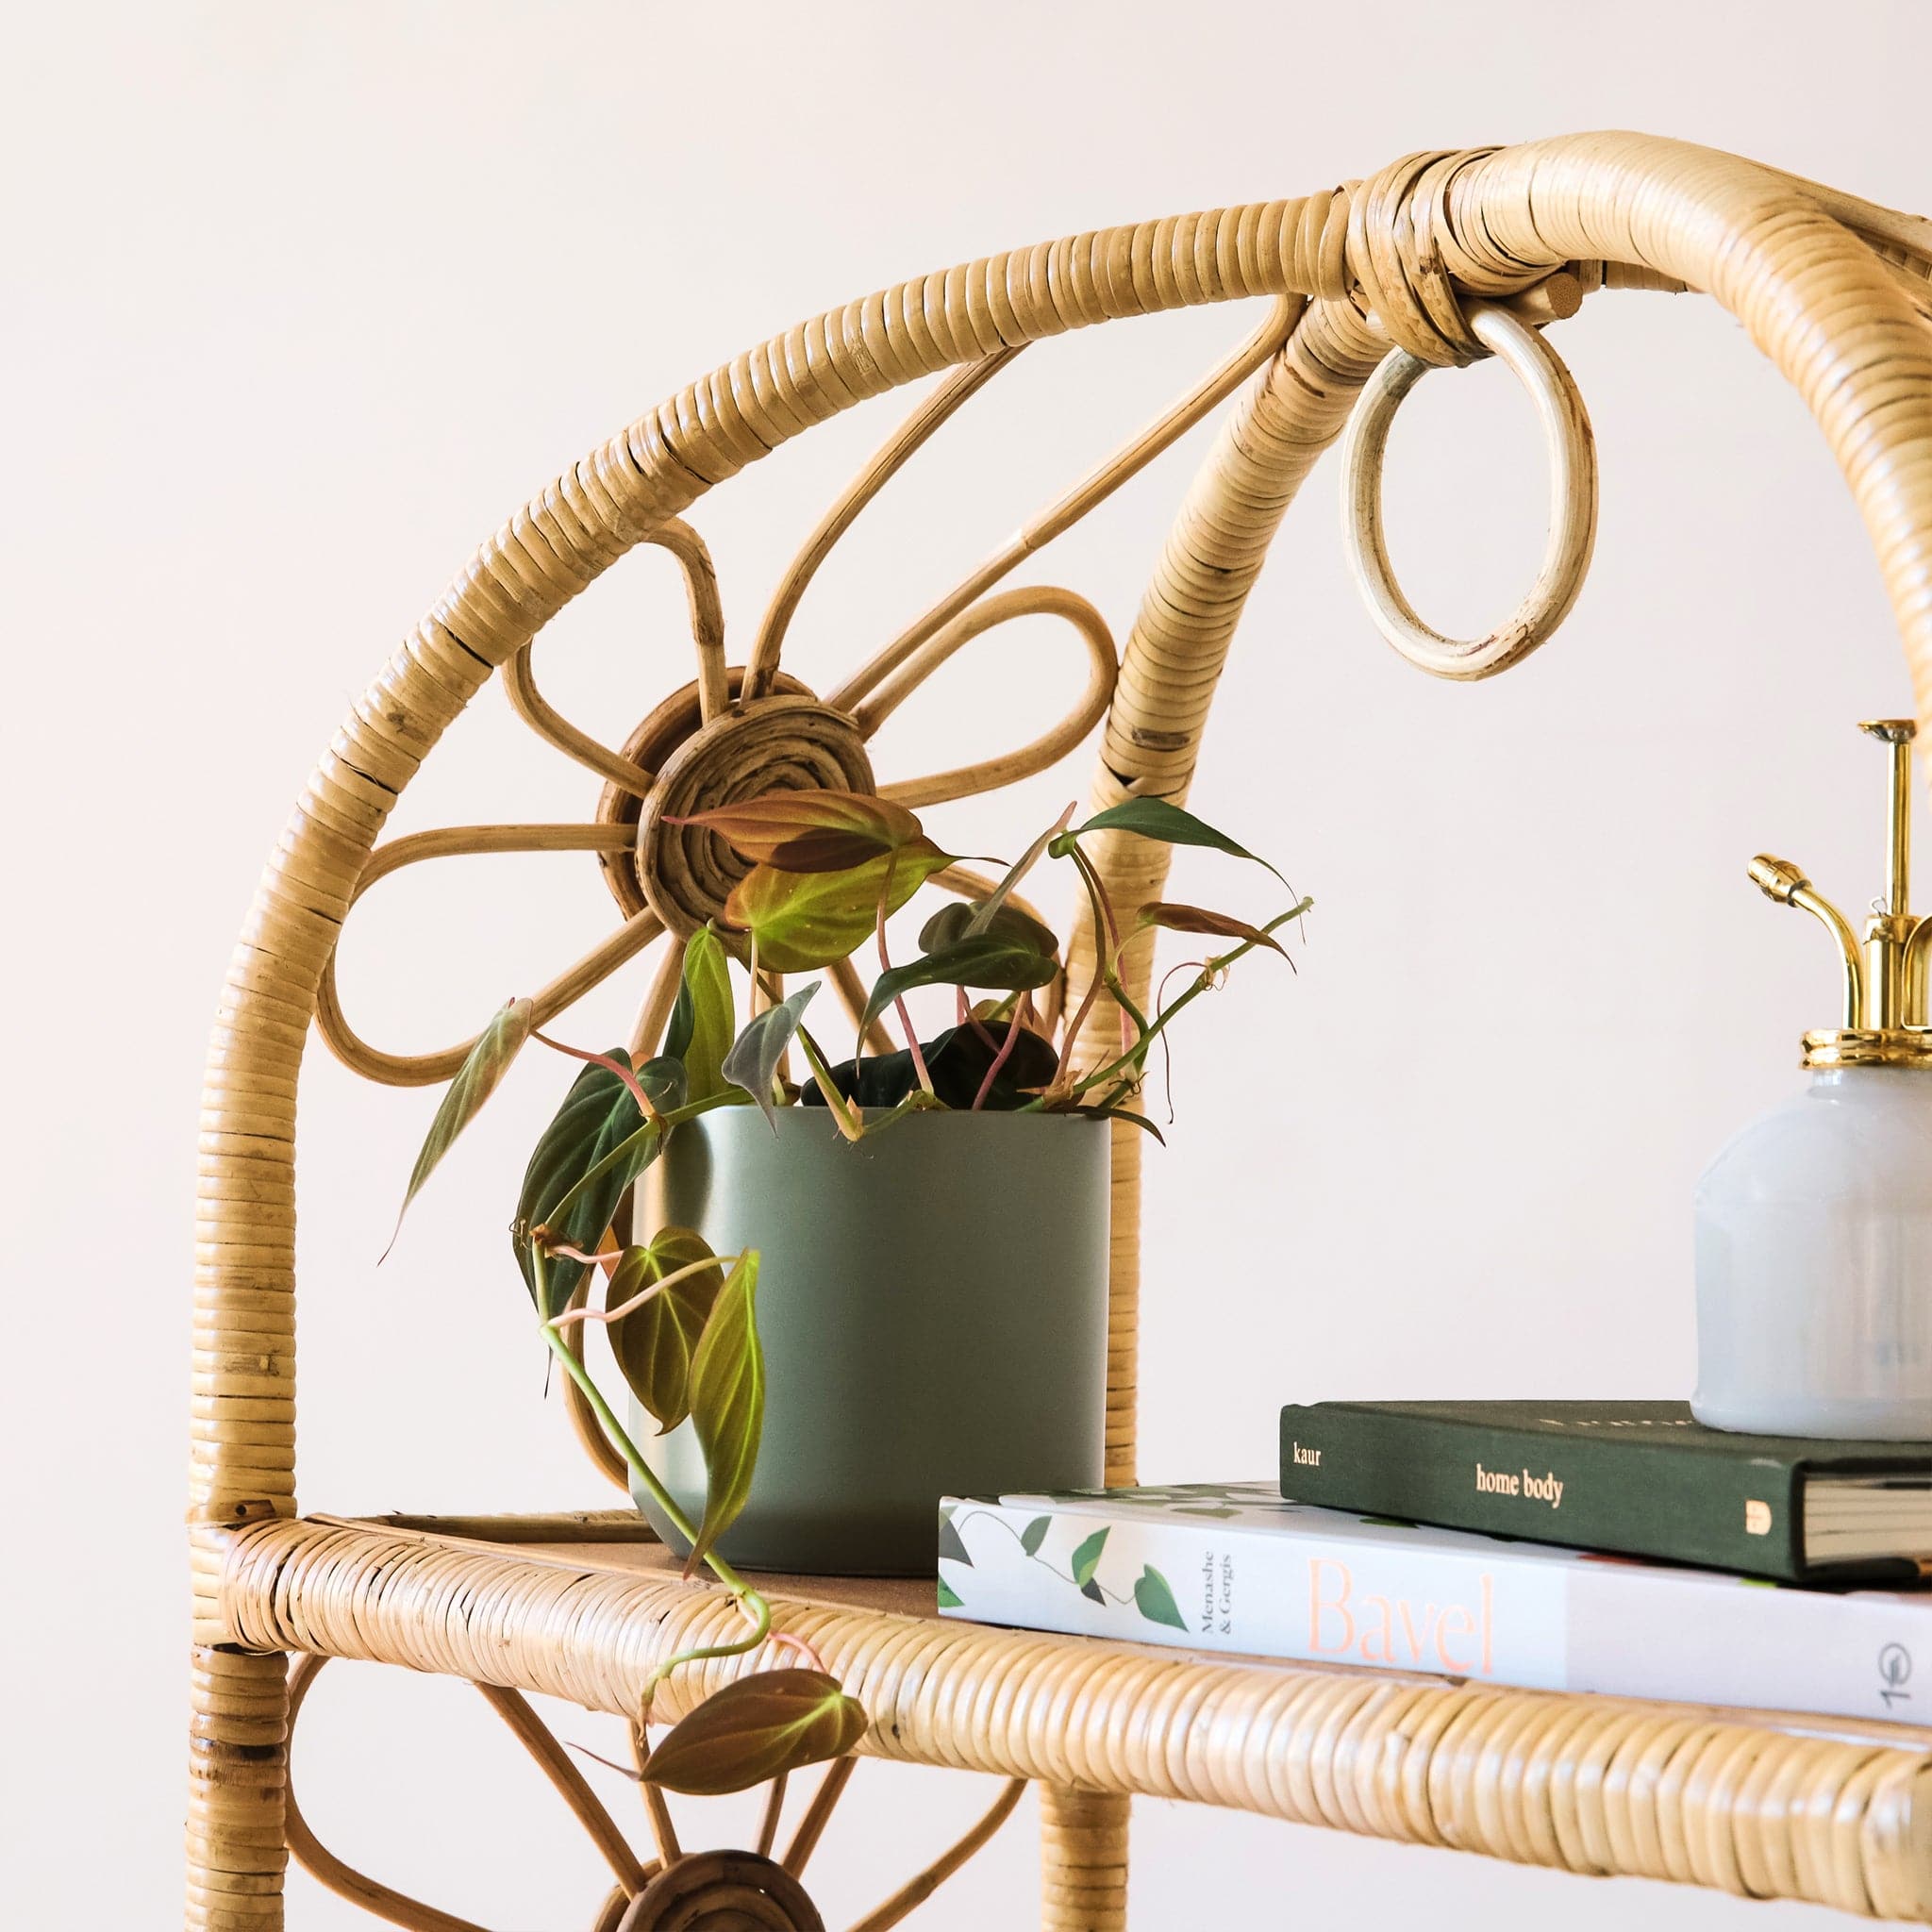 Natural woven rattan shelf with daisy accents on both sides. The sides are open and let in ample light to keep the shelves well lit. Displayed on each shelf are plants, books and little treasures.